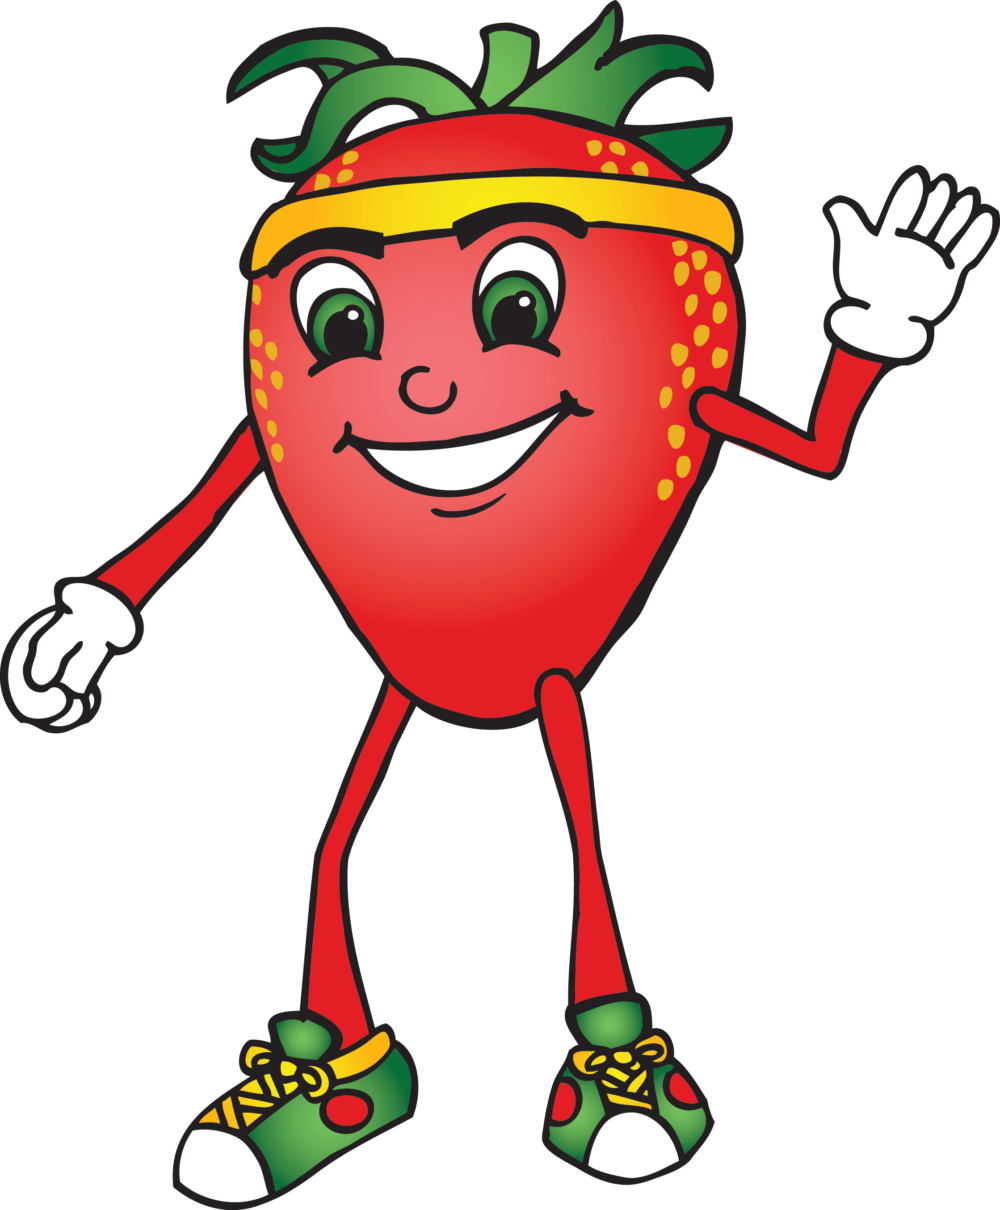 Strawberry runner cartoon for Vista Strawberry festival designed by Puzzle Pieces Marketing